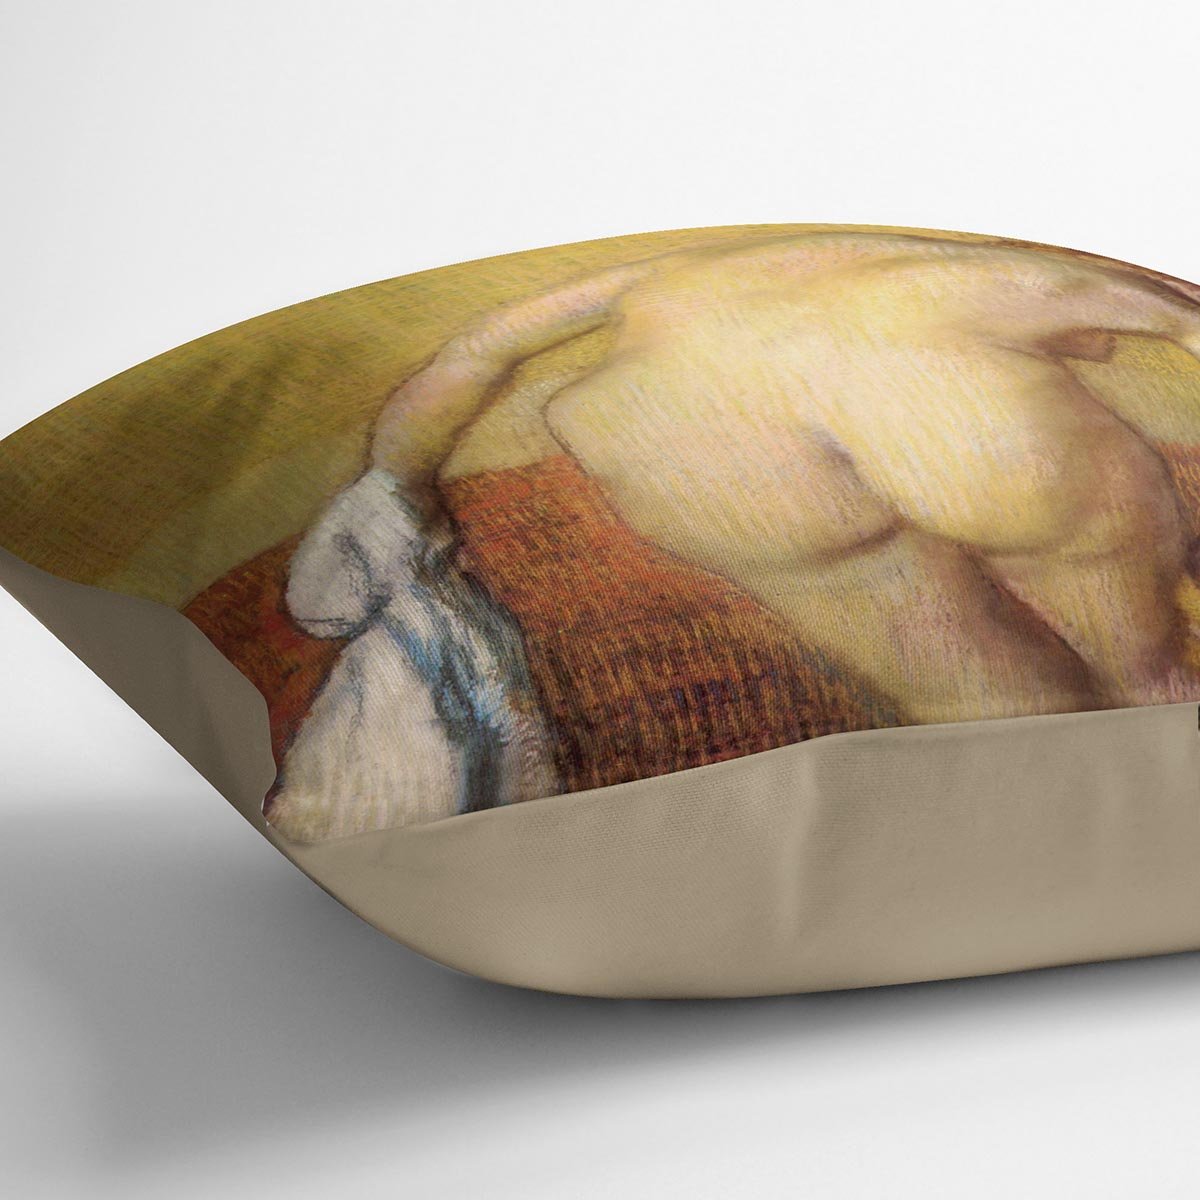 Woman Drying with towel and sponge by Degas Cushion